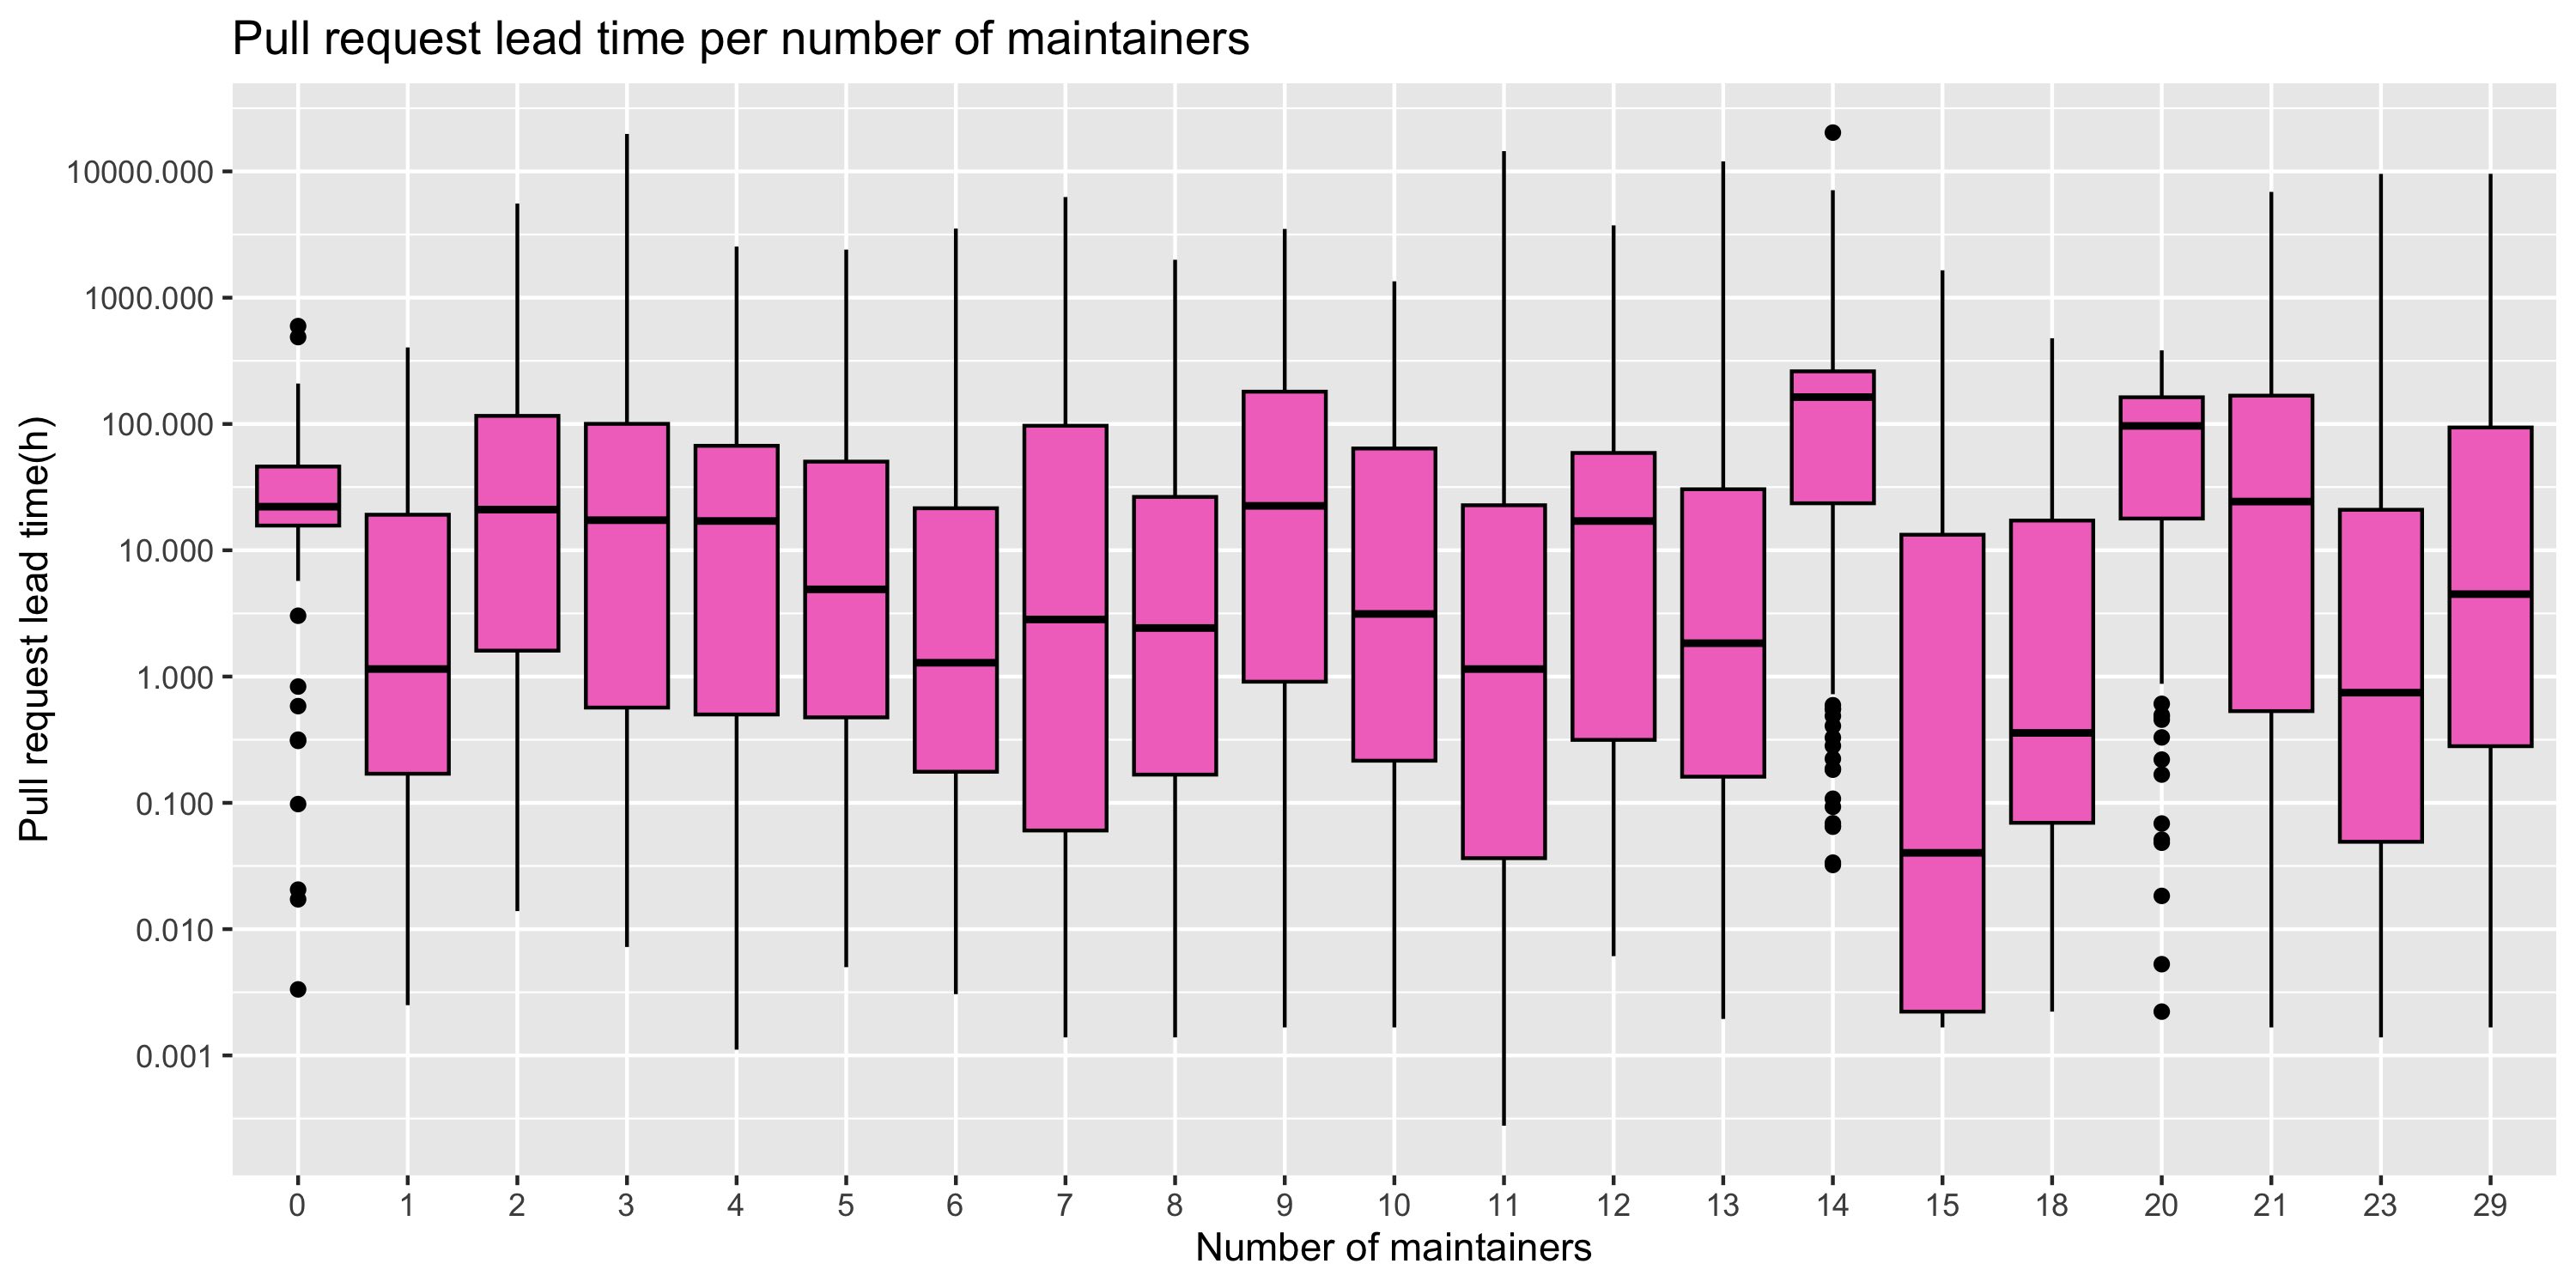 Pull request lead time per number of maintainers